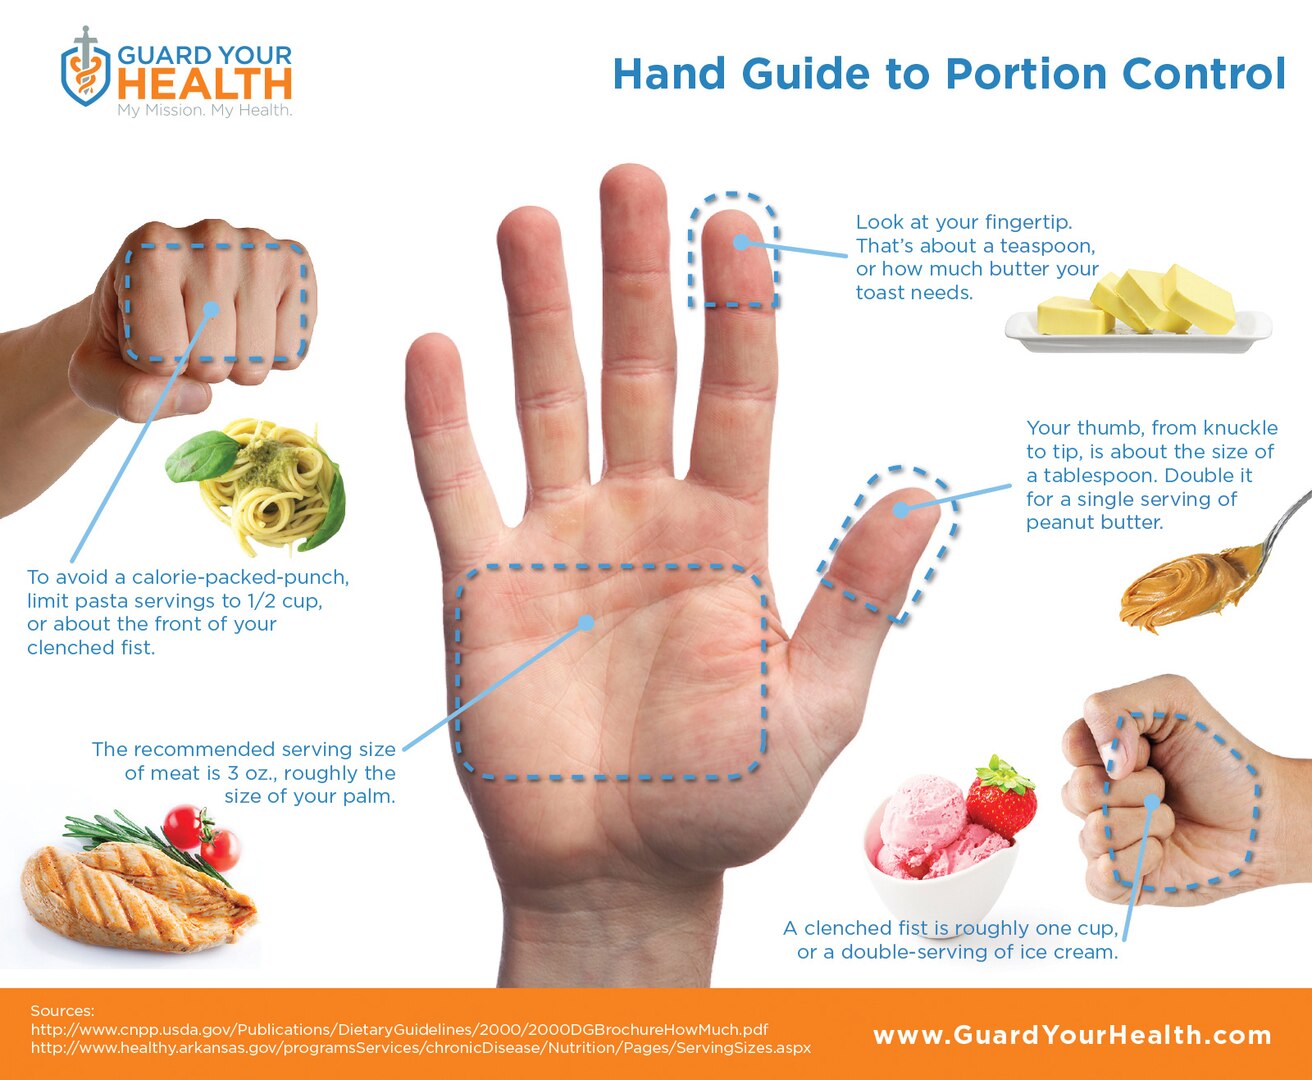 Guard Your Health's "Hand Guide to Portion Control," which provides a handy measuring system to aid portion control.